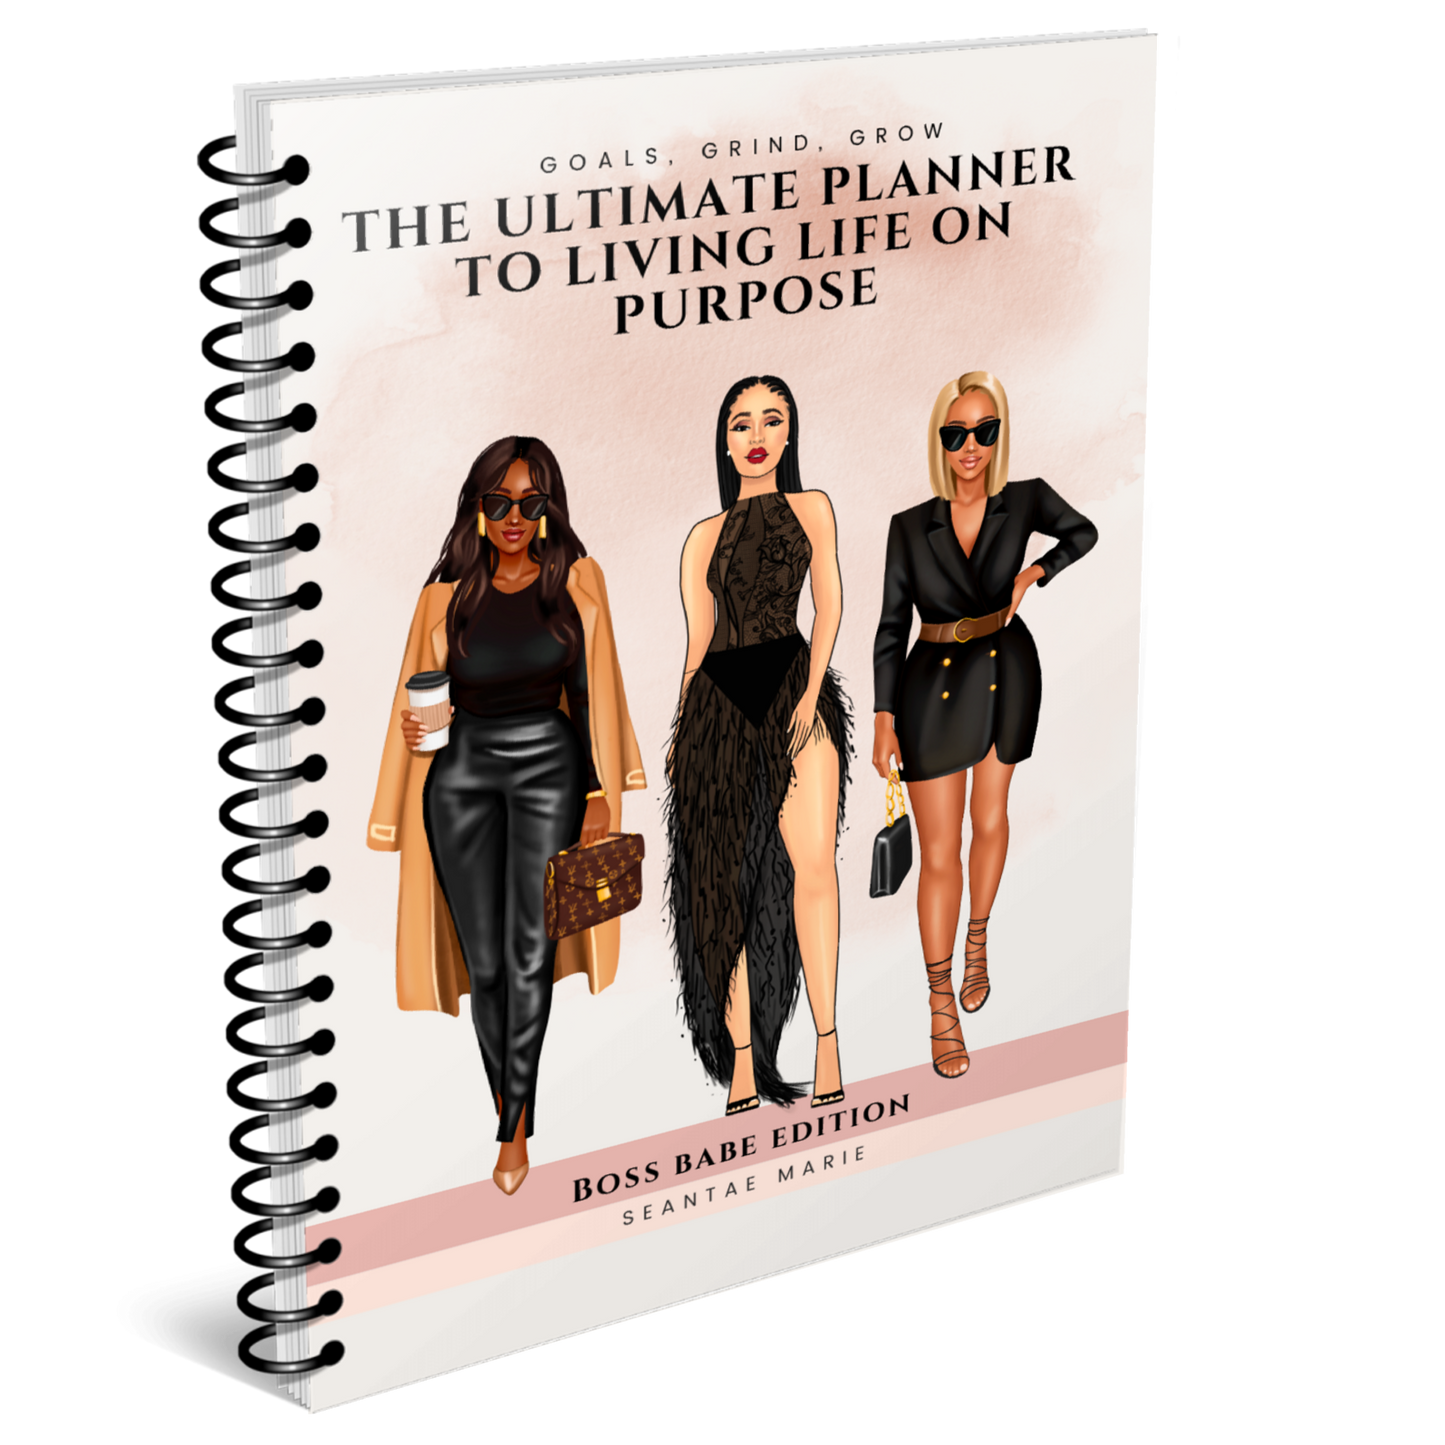 EVERYDAY WOMAN: THE ULTIMATE PLANNER TO LIVING LIFE ON PURPOSE (PRE-ORDER)